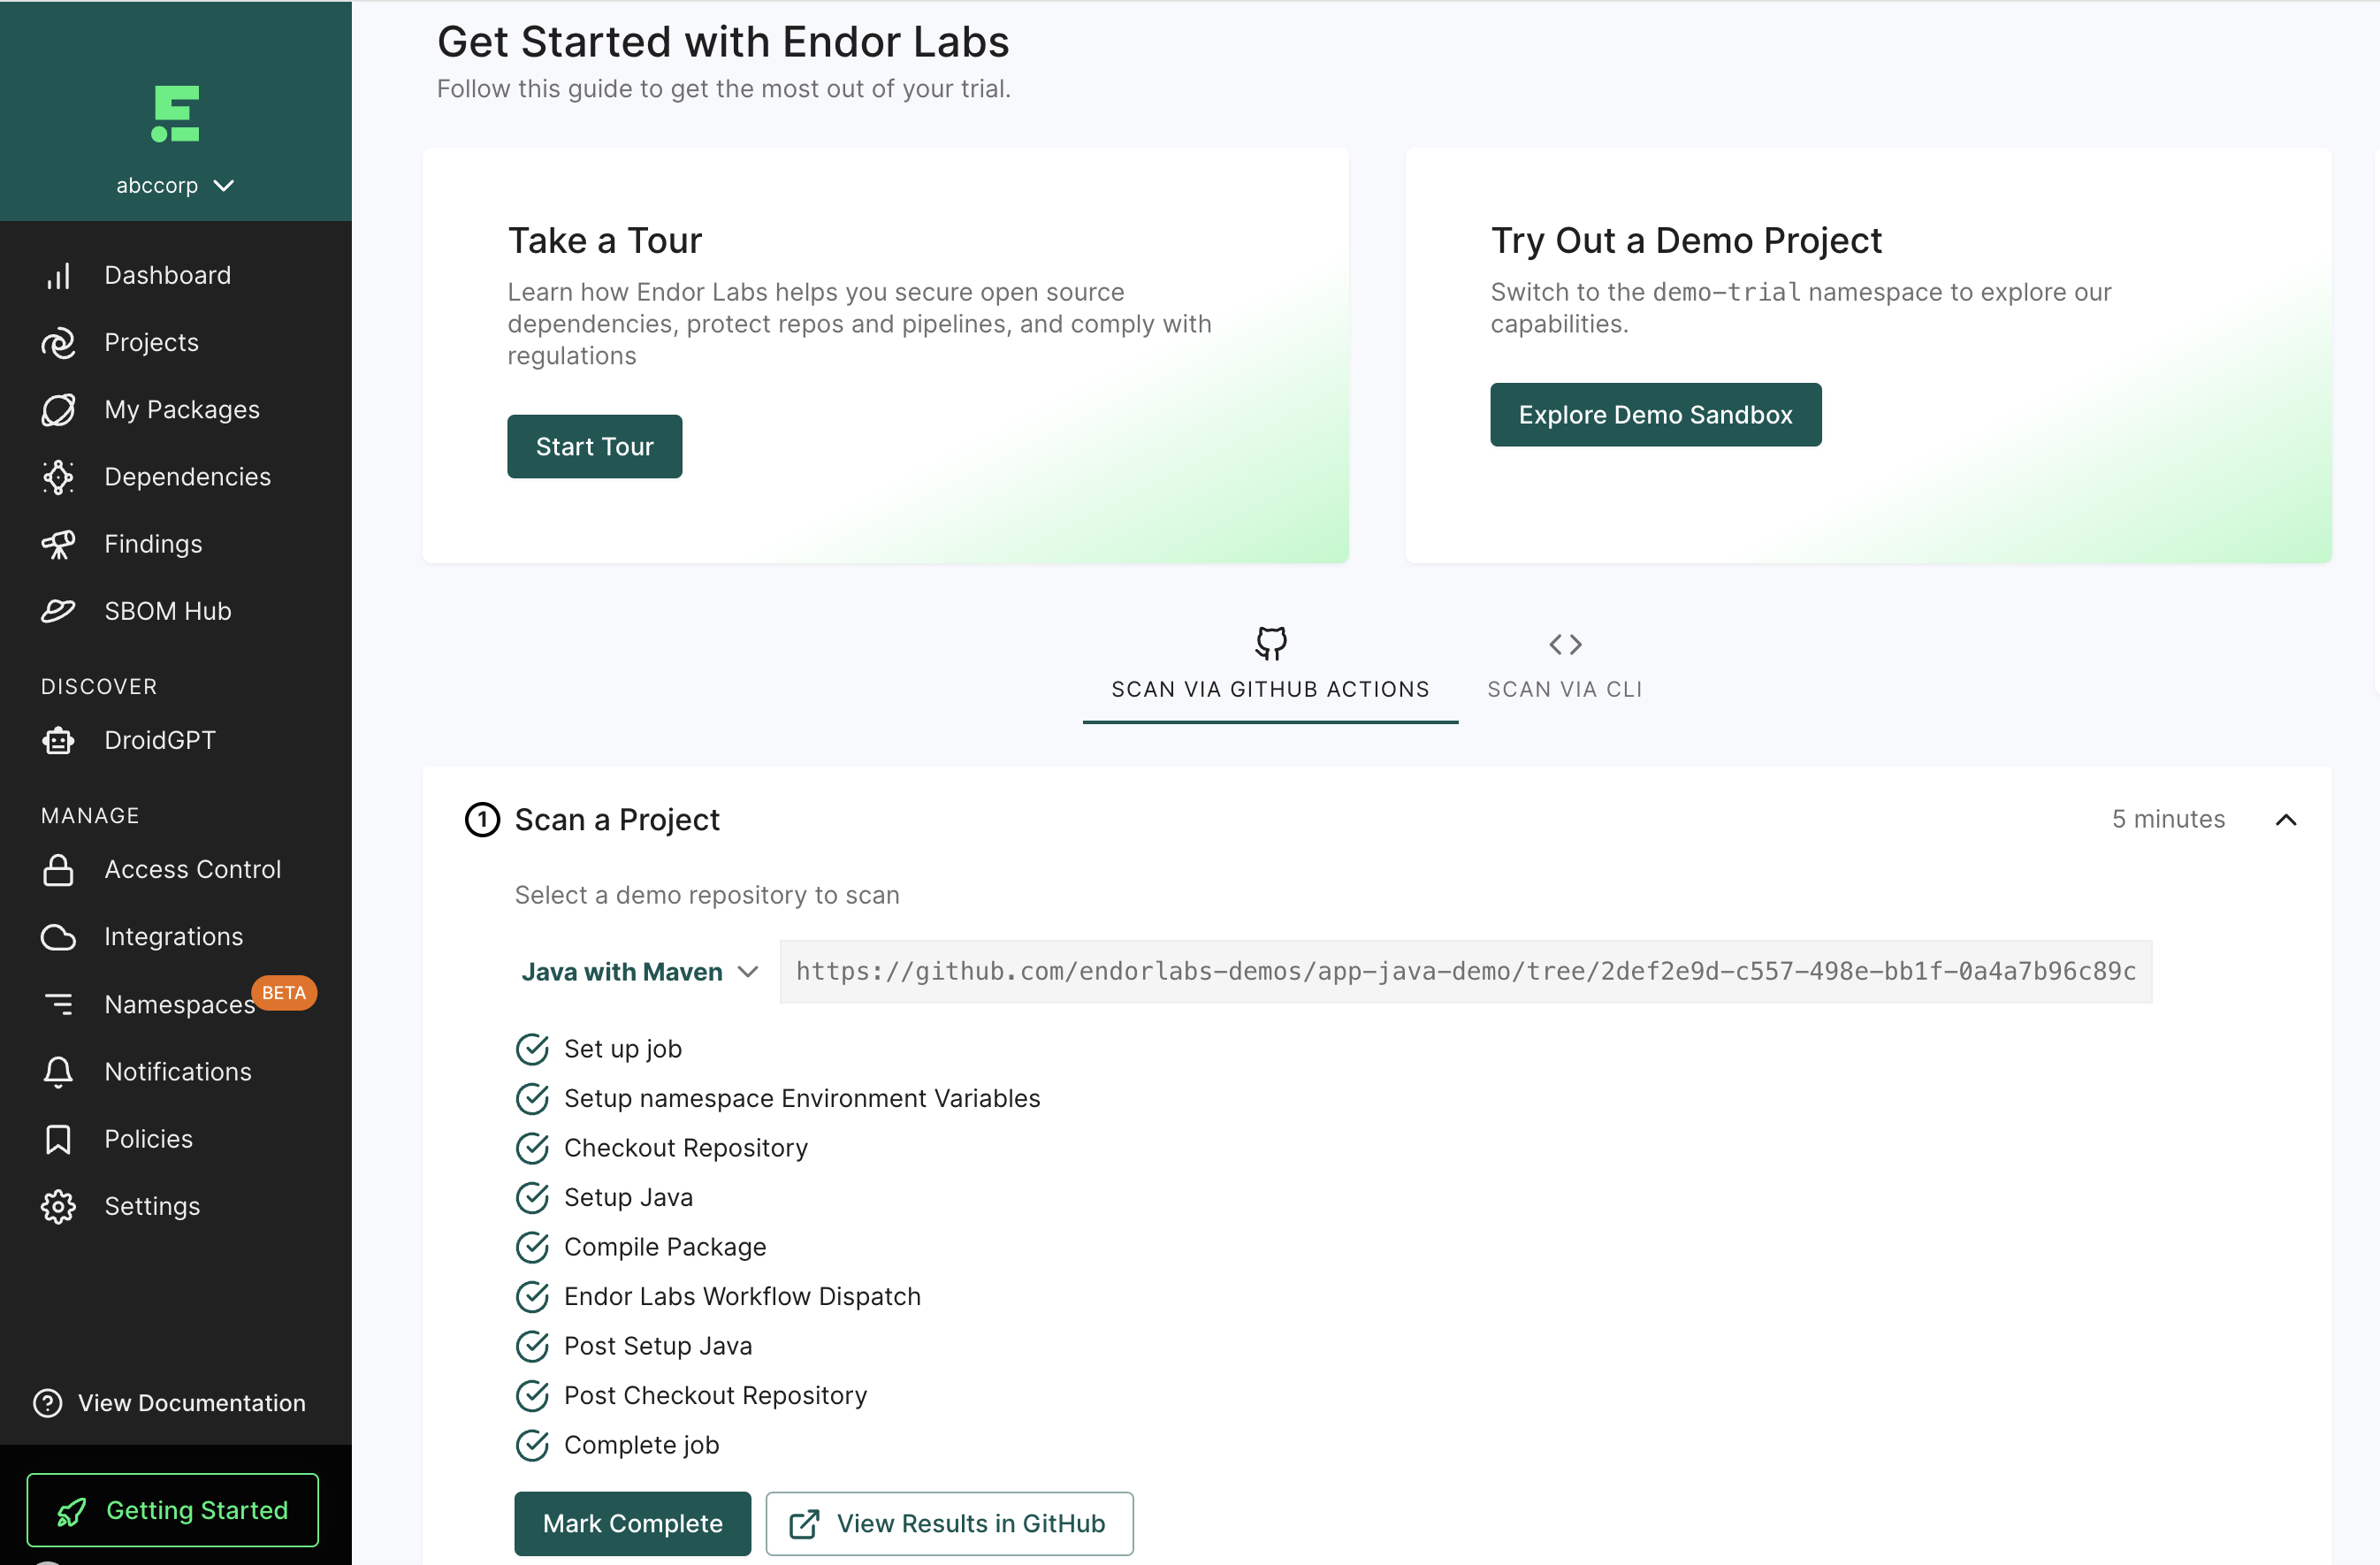 Getting Started with Endor Labs